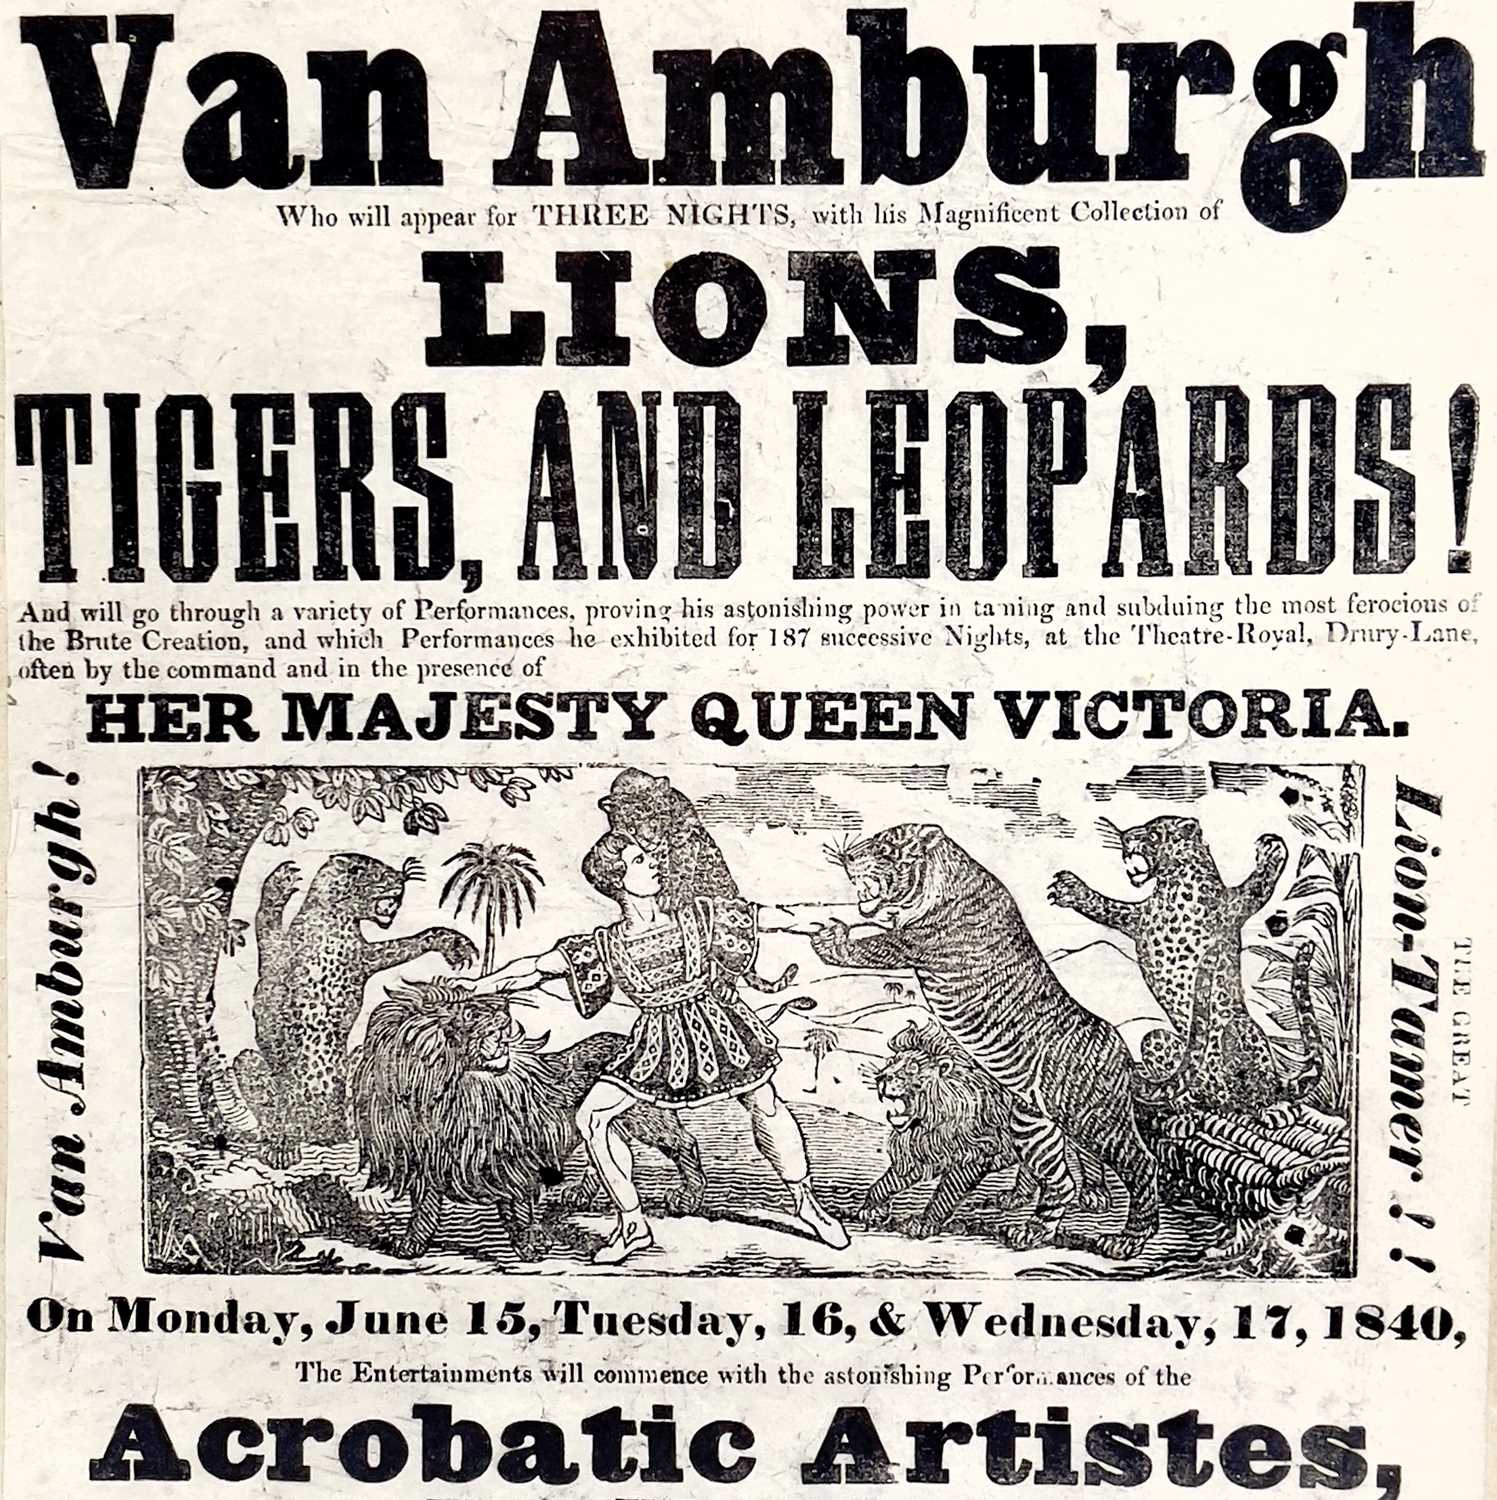 A rare early Victorian circus advertising poster or flyer Mr Van Amburgh the Great Lion-Tamer. - Image 5 of 6